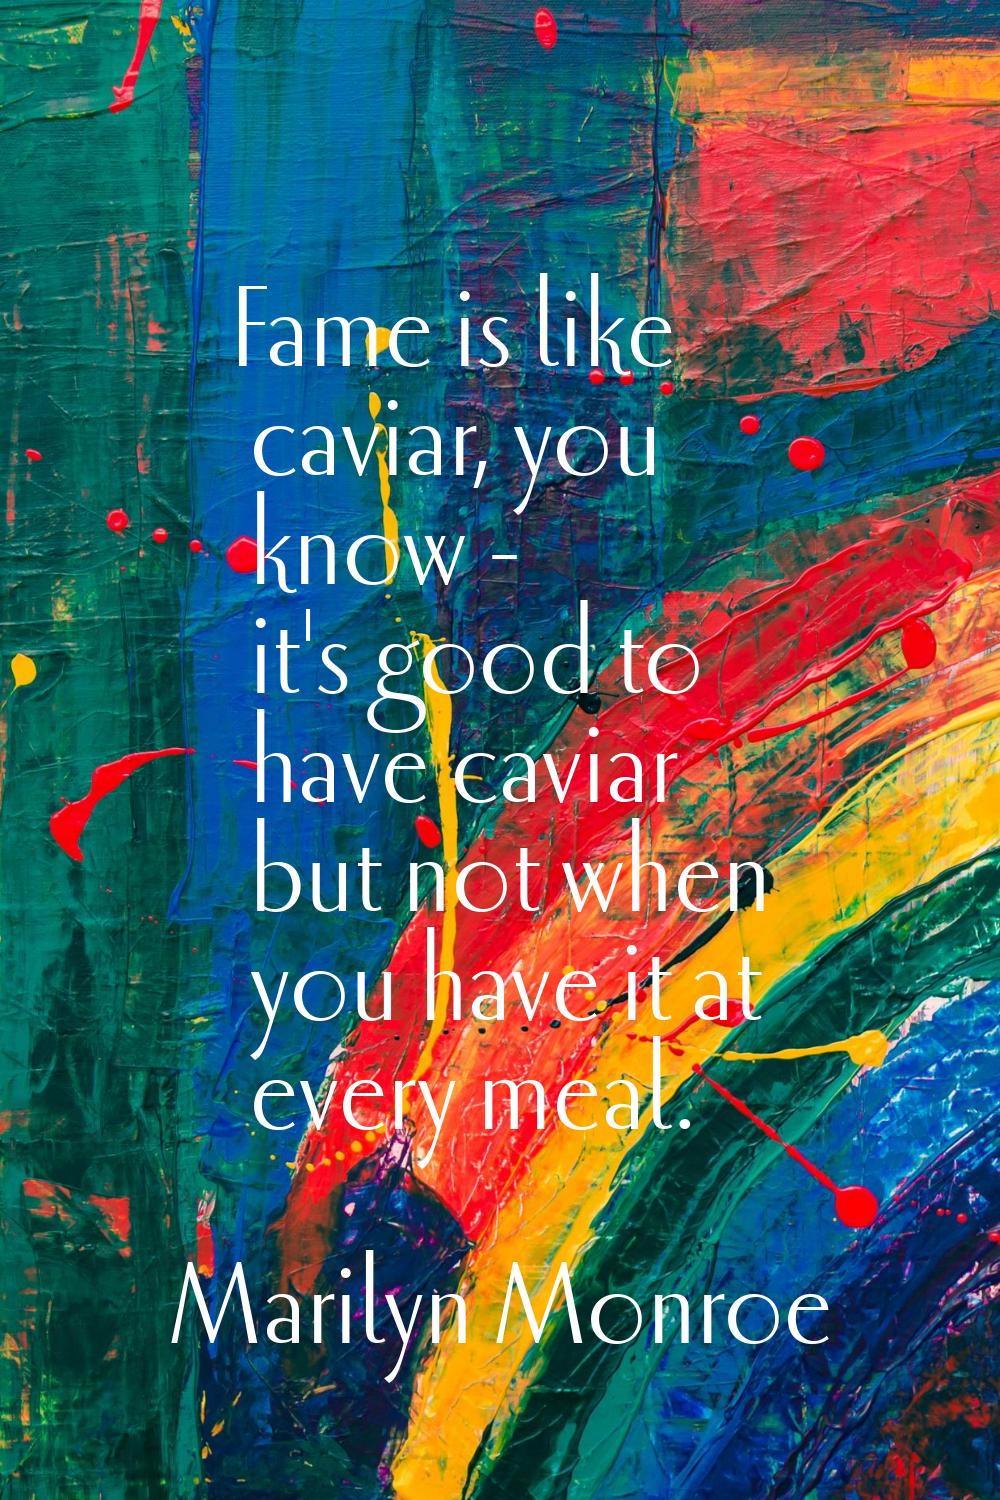 Fame is like caviar, you know - it's good to have caviar but not when you have it at every meal.